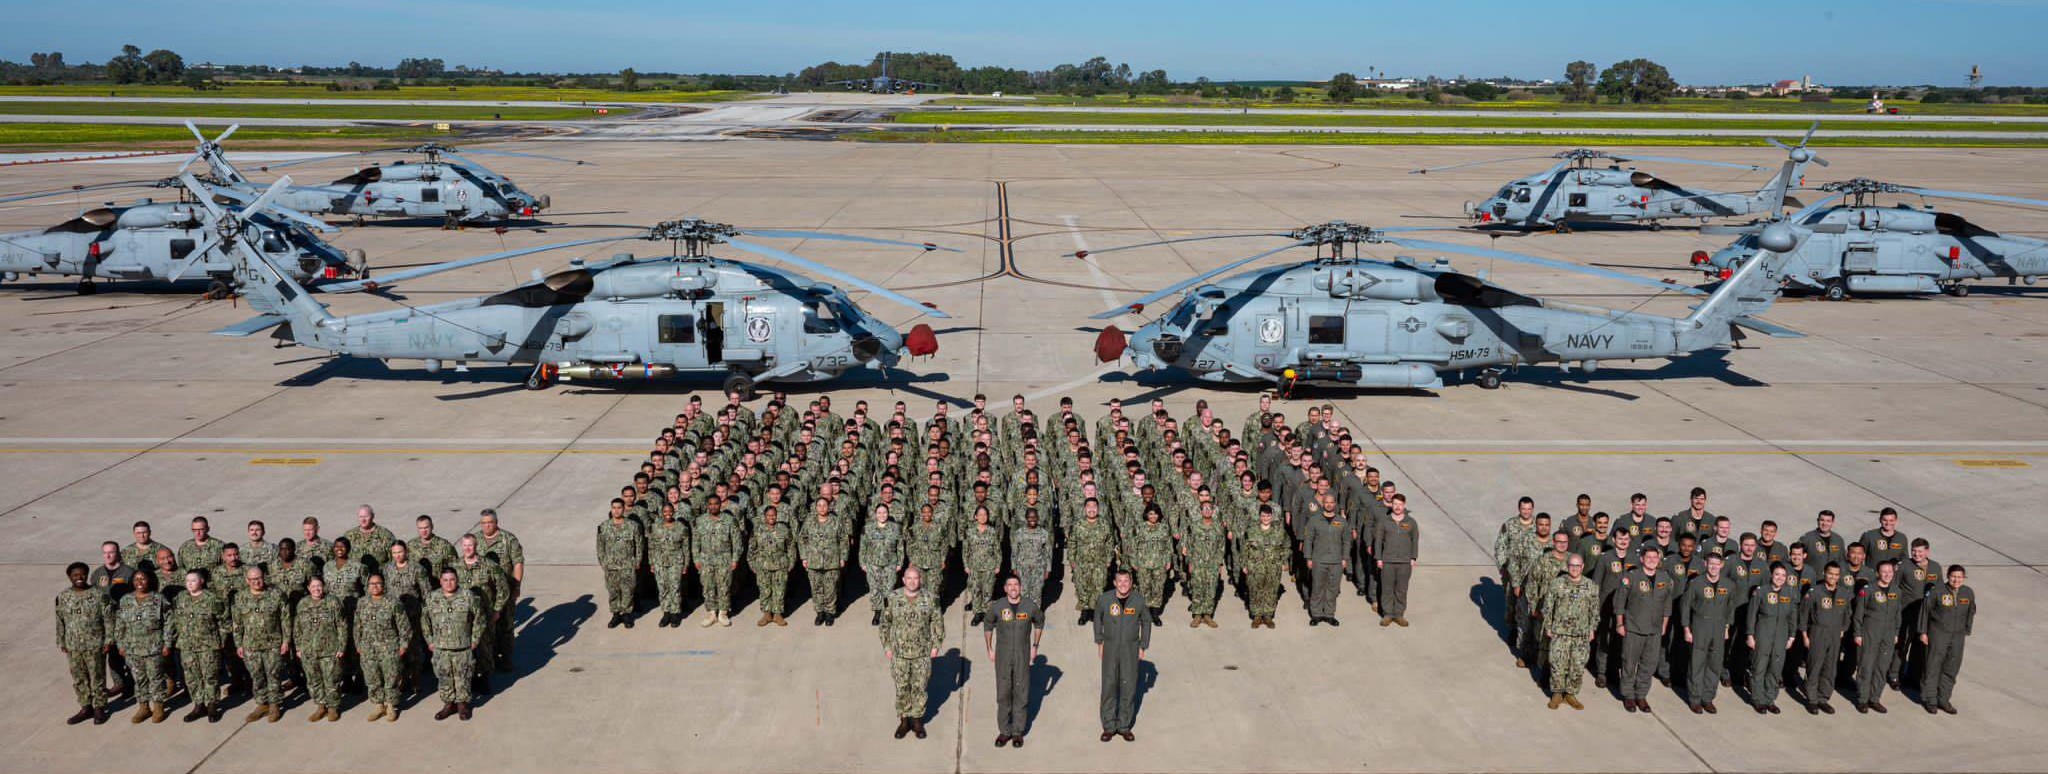 hsm-79 griffins helicopter maritime strike squadron mh-60r seahawk us navy 59